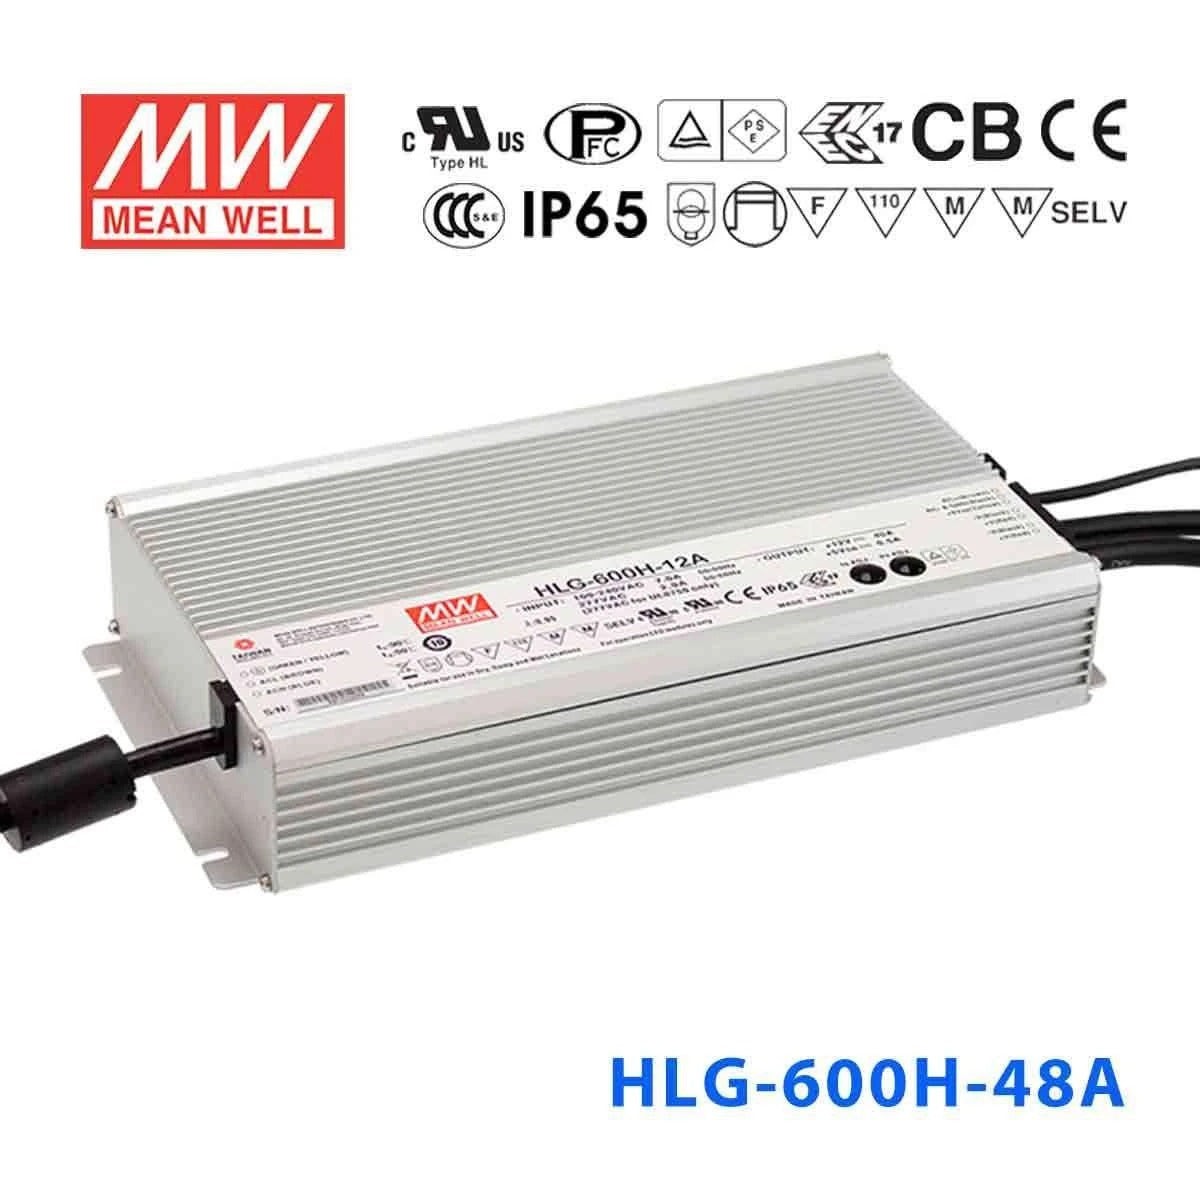 Mean Well HLG-600H-48A Power Supply 600W 48V - Adjustable